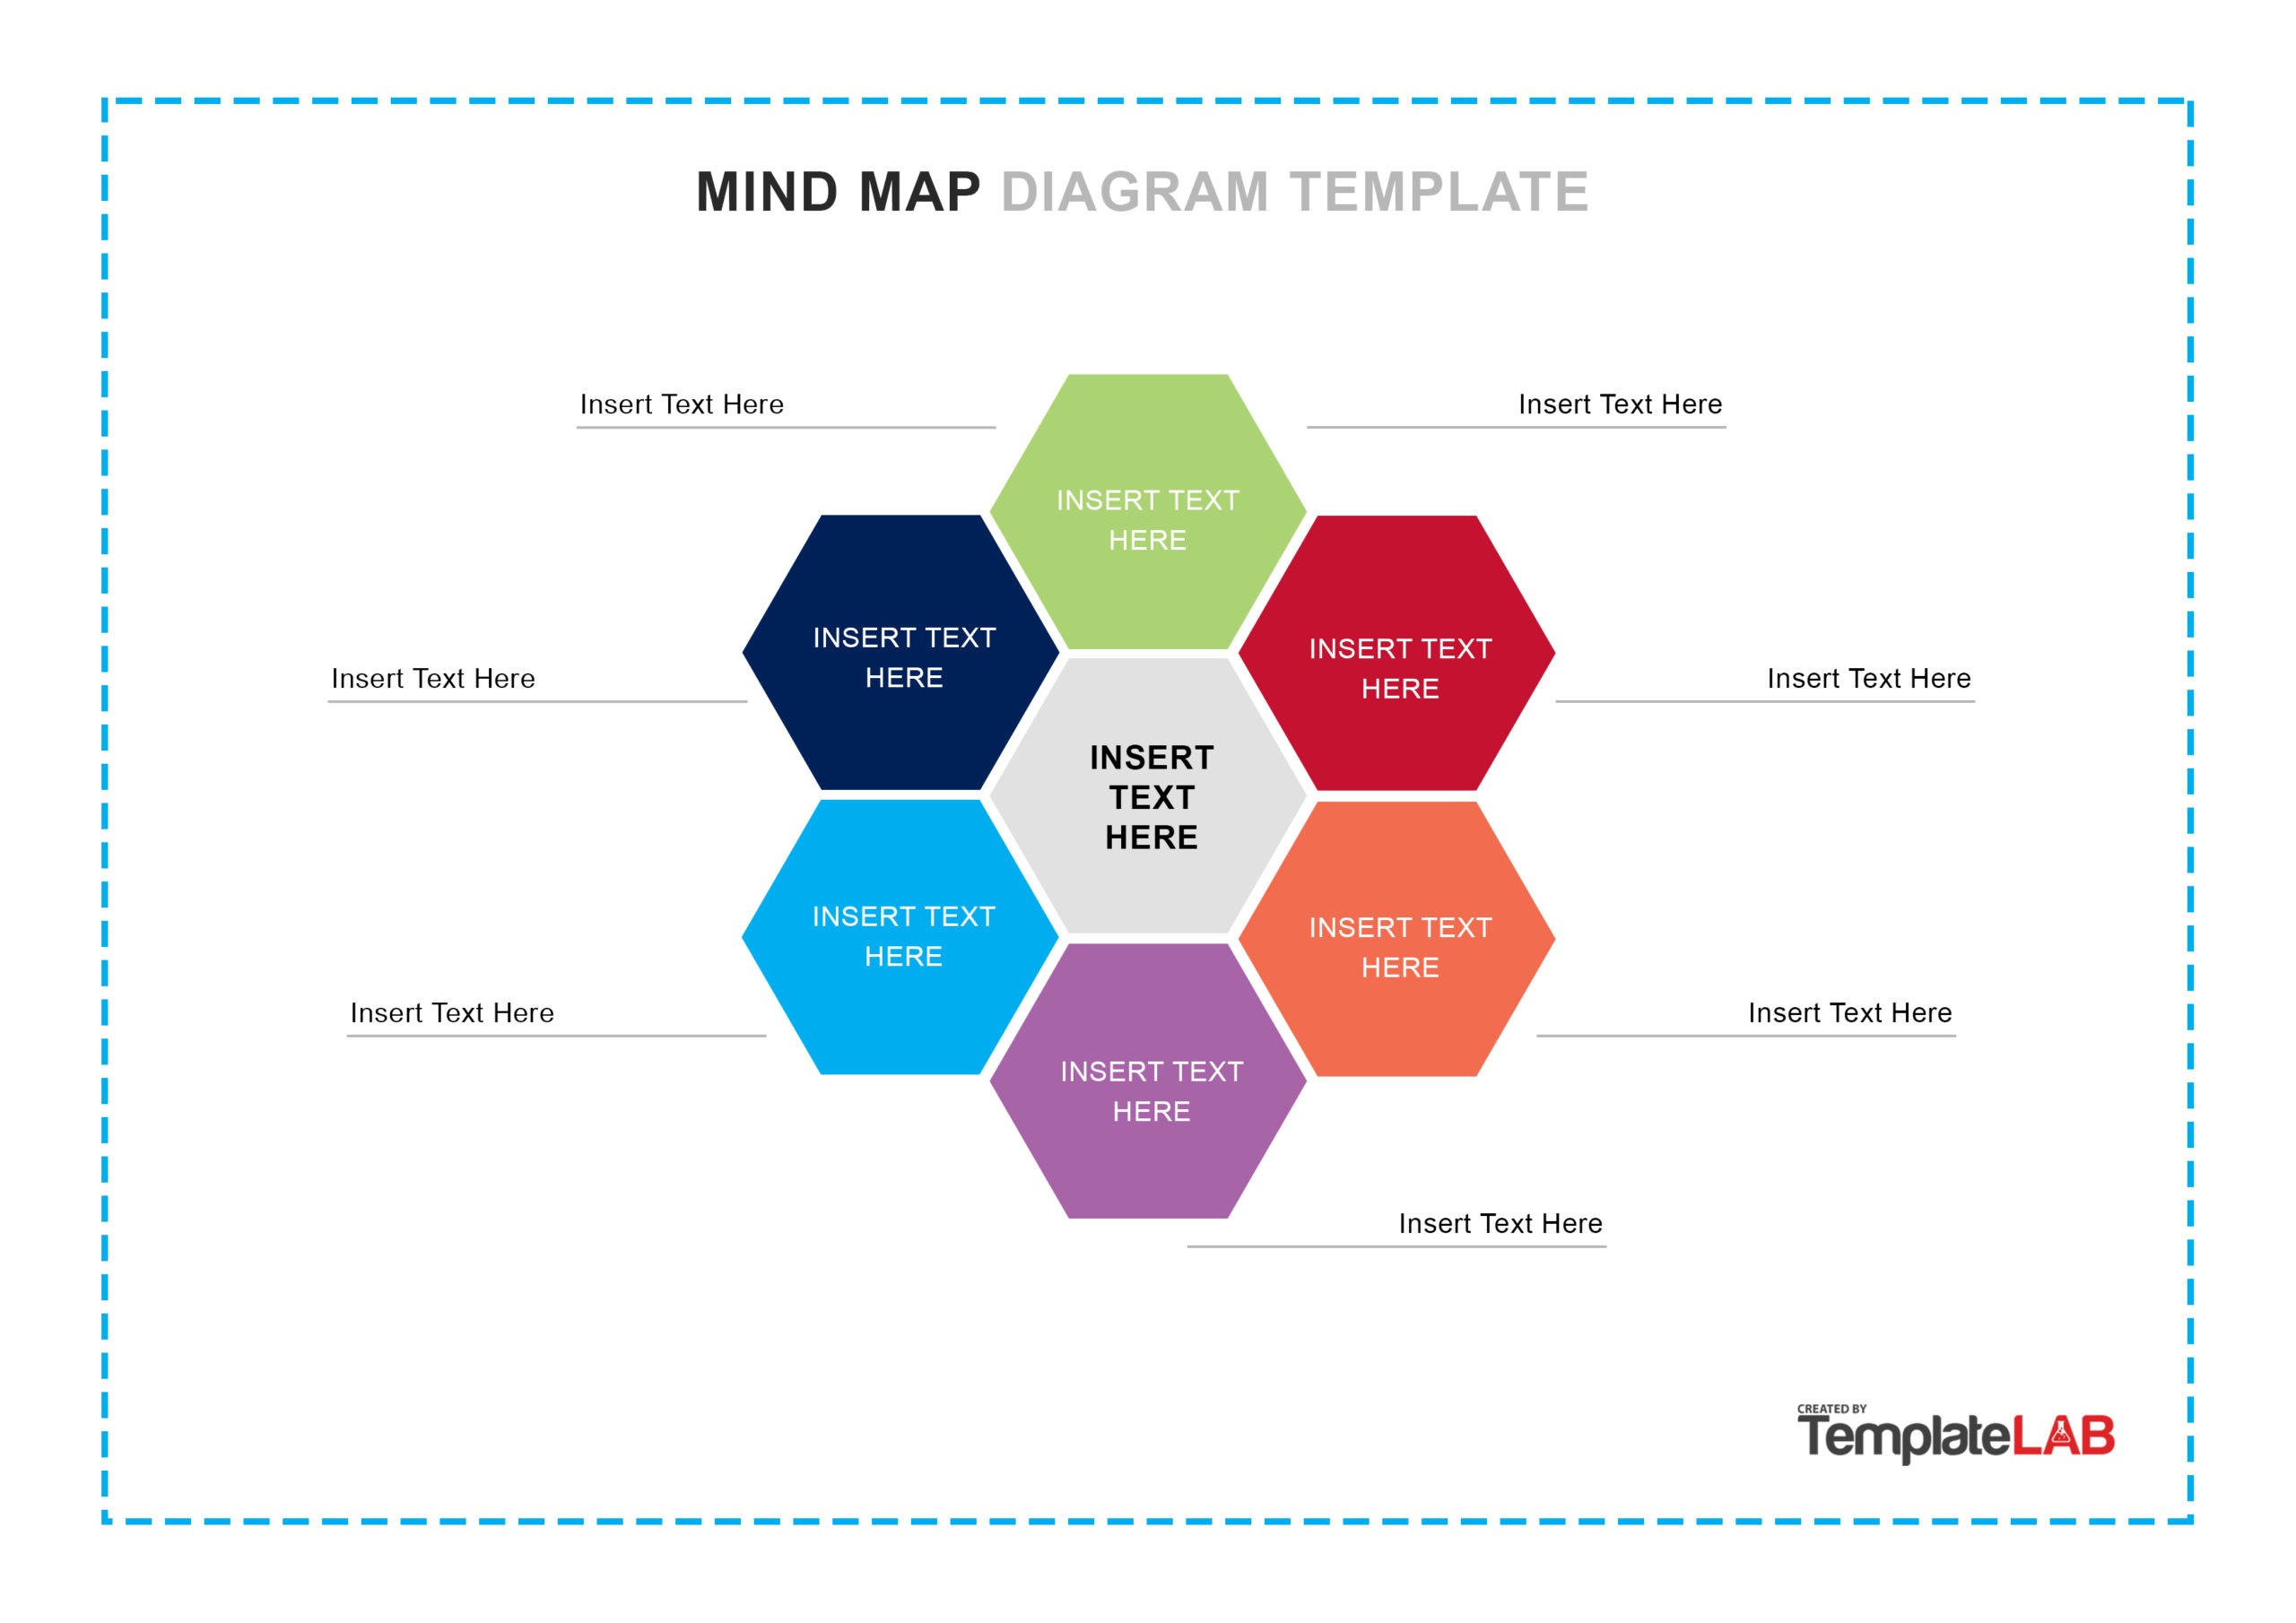 37 Free Mind Map Templates & Examples (Word,PowerPoint,PSD)